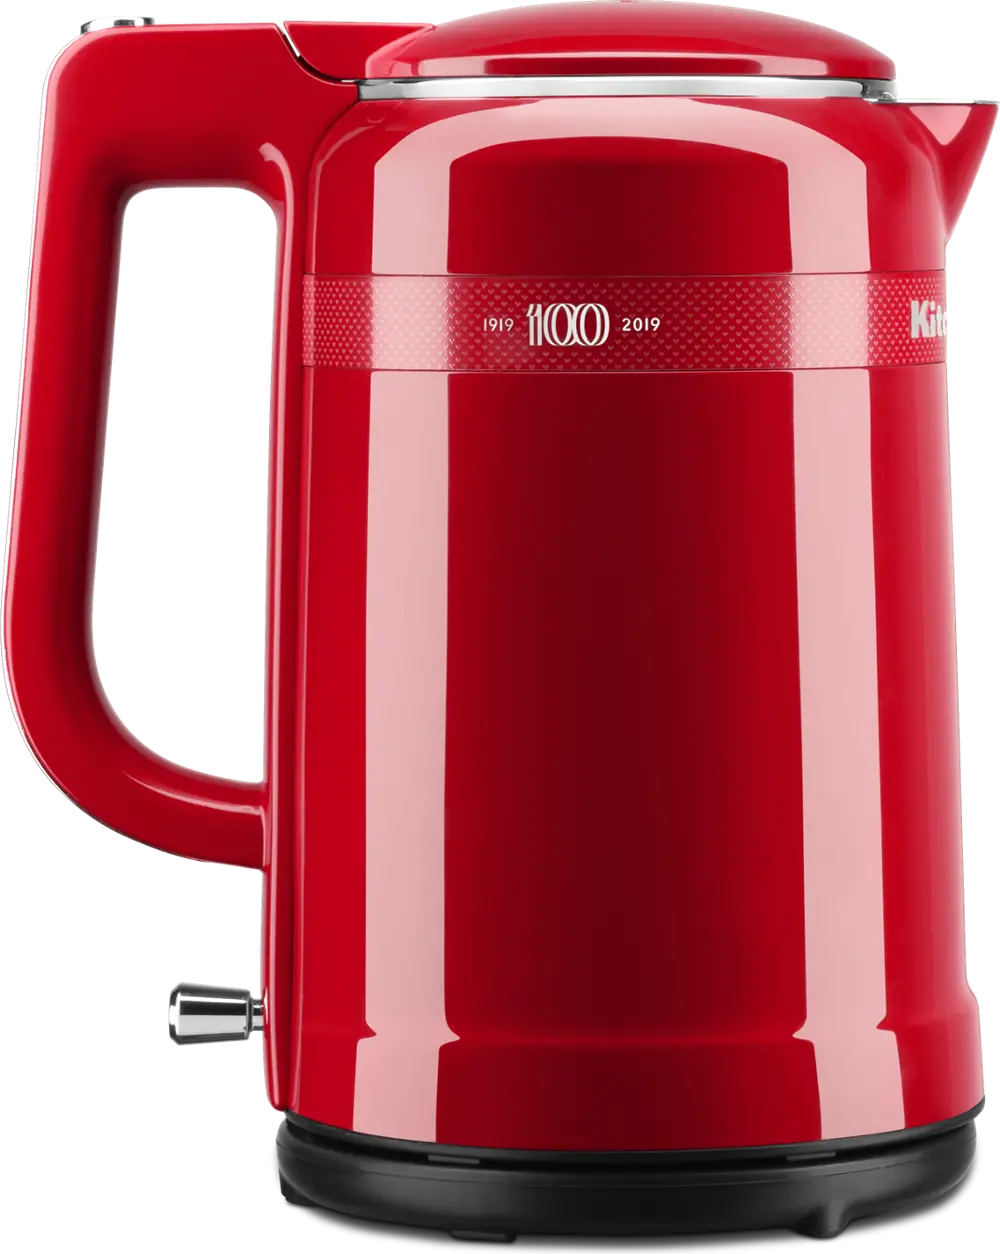 KEK1565QHSD KitchenAid 100 Year Limited Edition Red Electric Kettle - Queen of Hearts-1